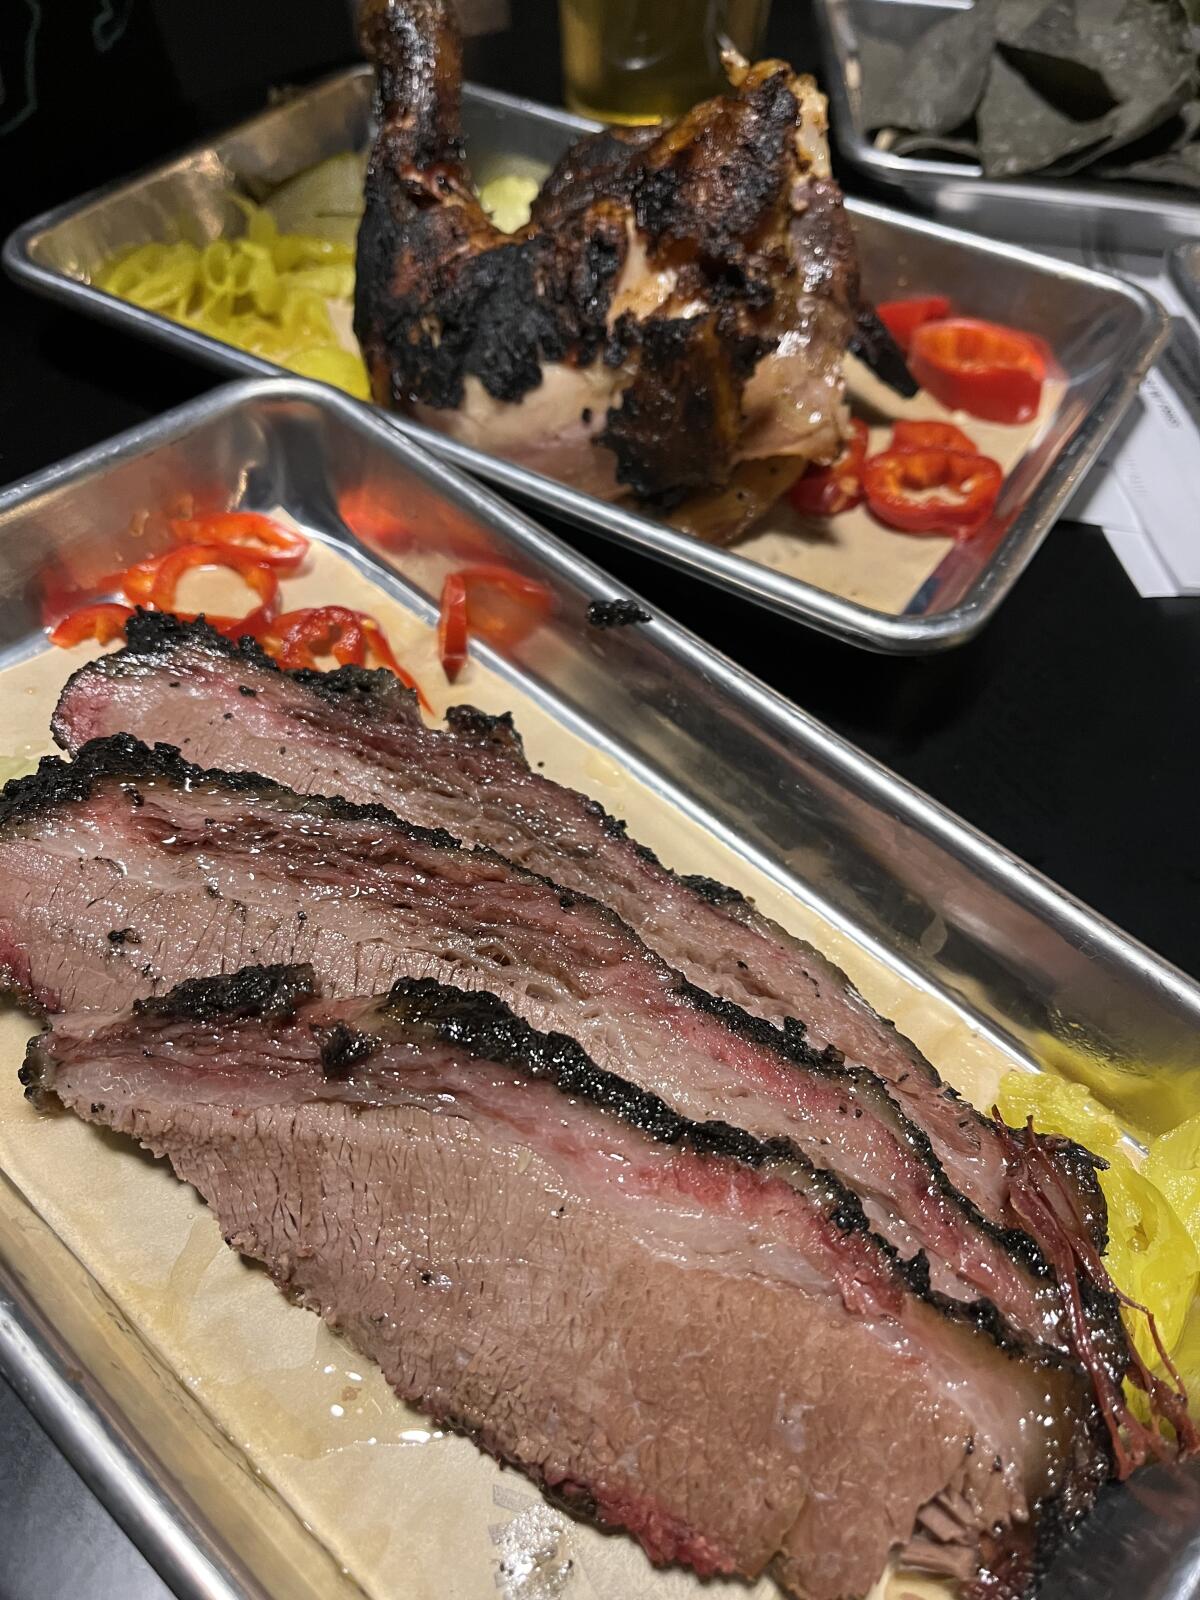 Villains Brewing Co. in Anaheim serves barbecue entrees by Smoke & Fire.